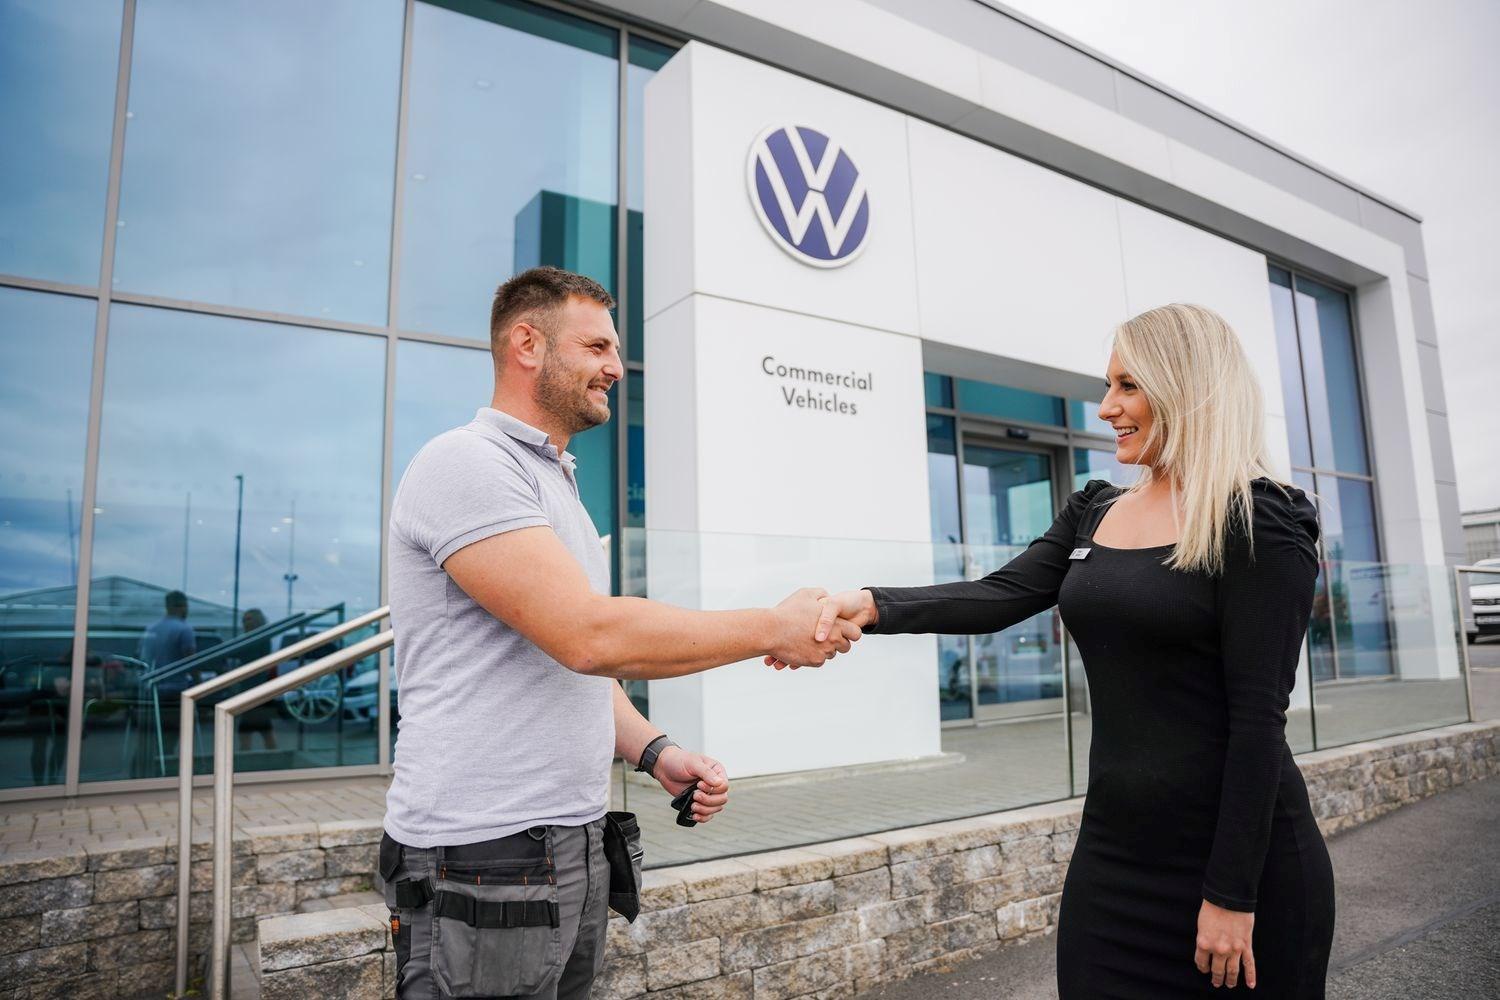 Volkswagen Commercials Sales Specialist shakes customers hand outside of the Agnew Van Centre showroom